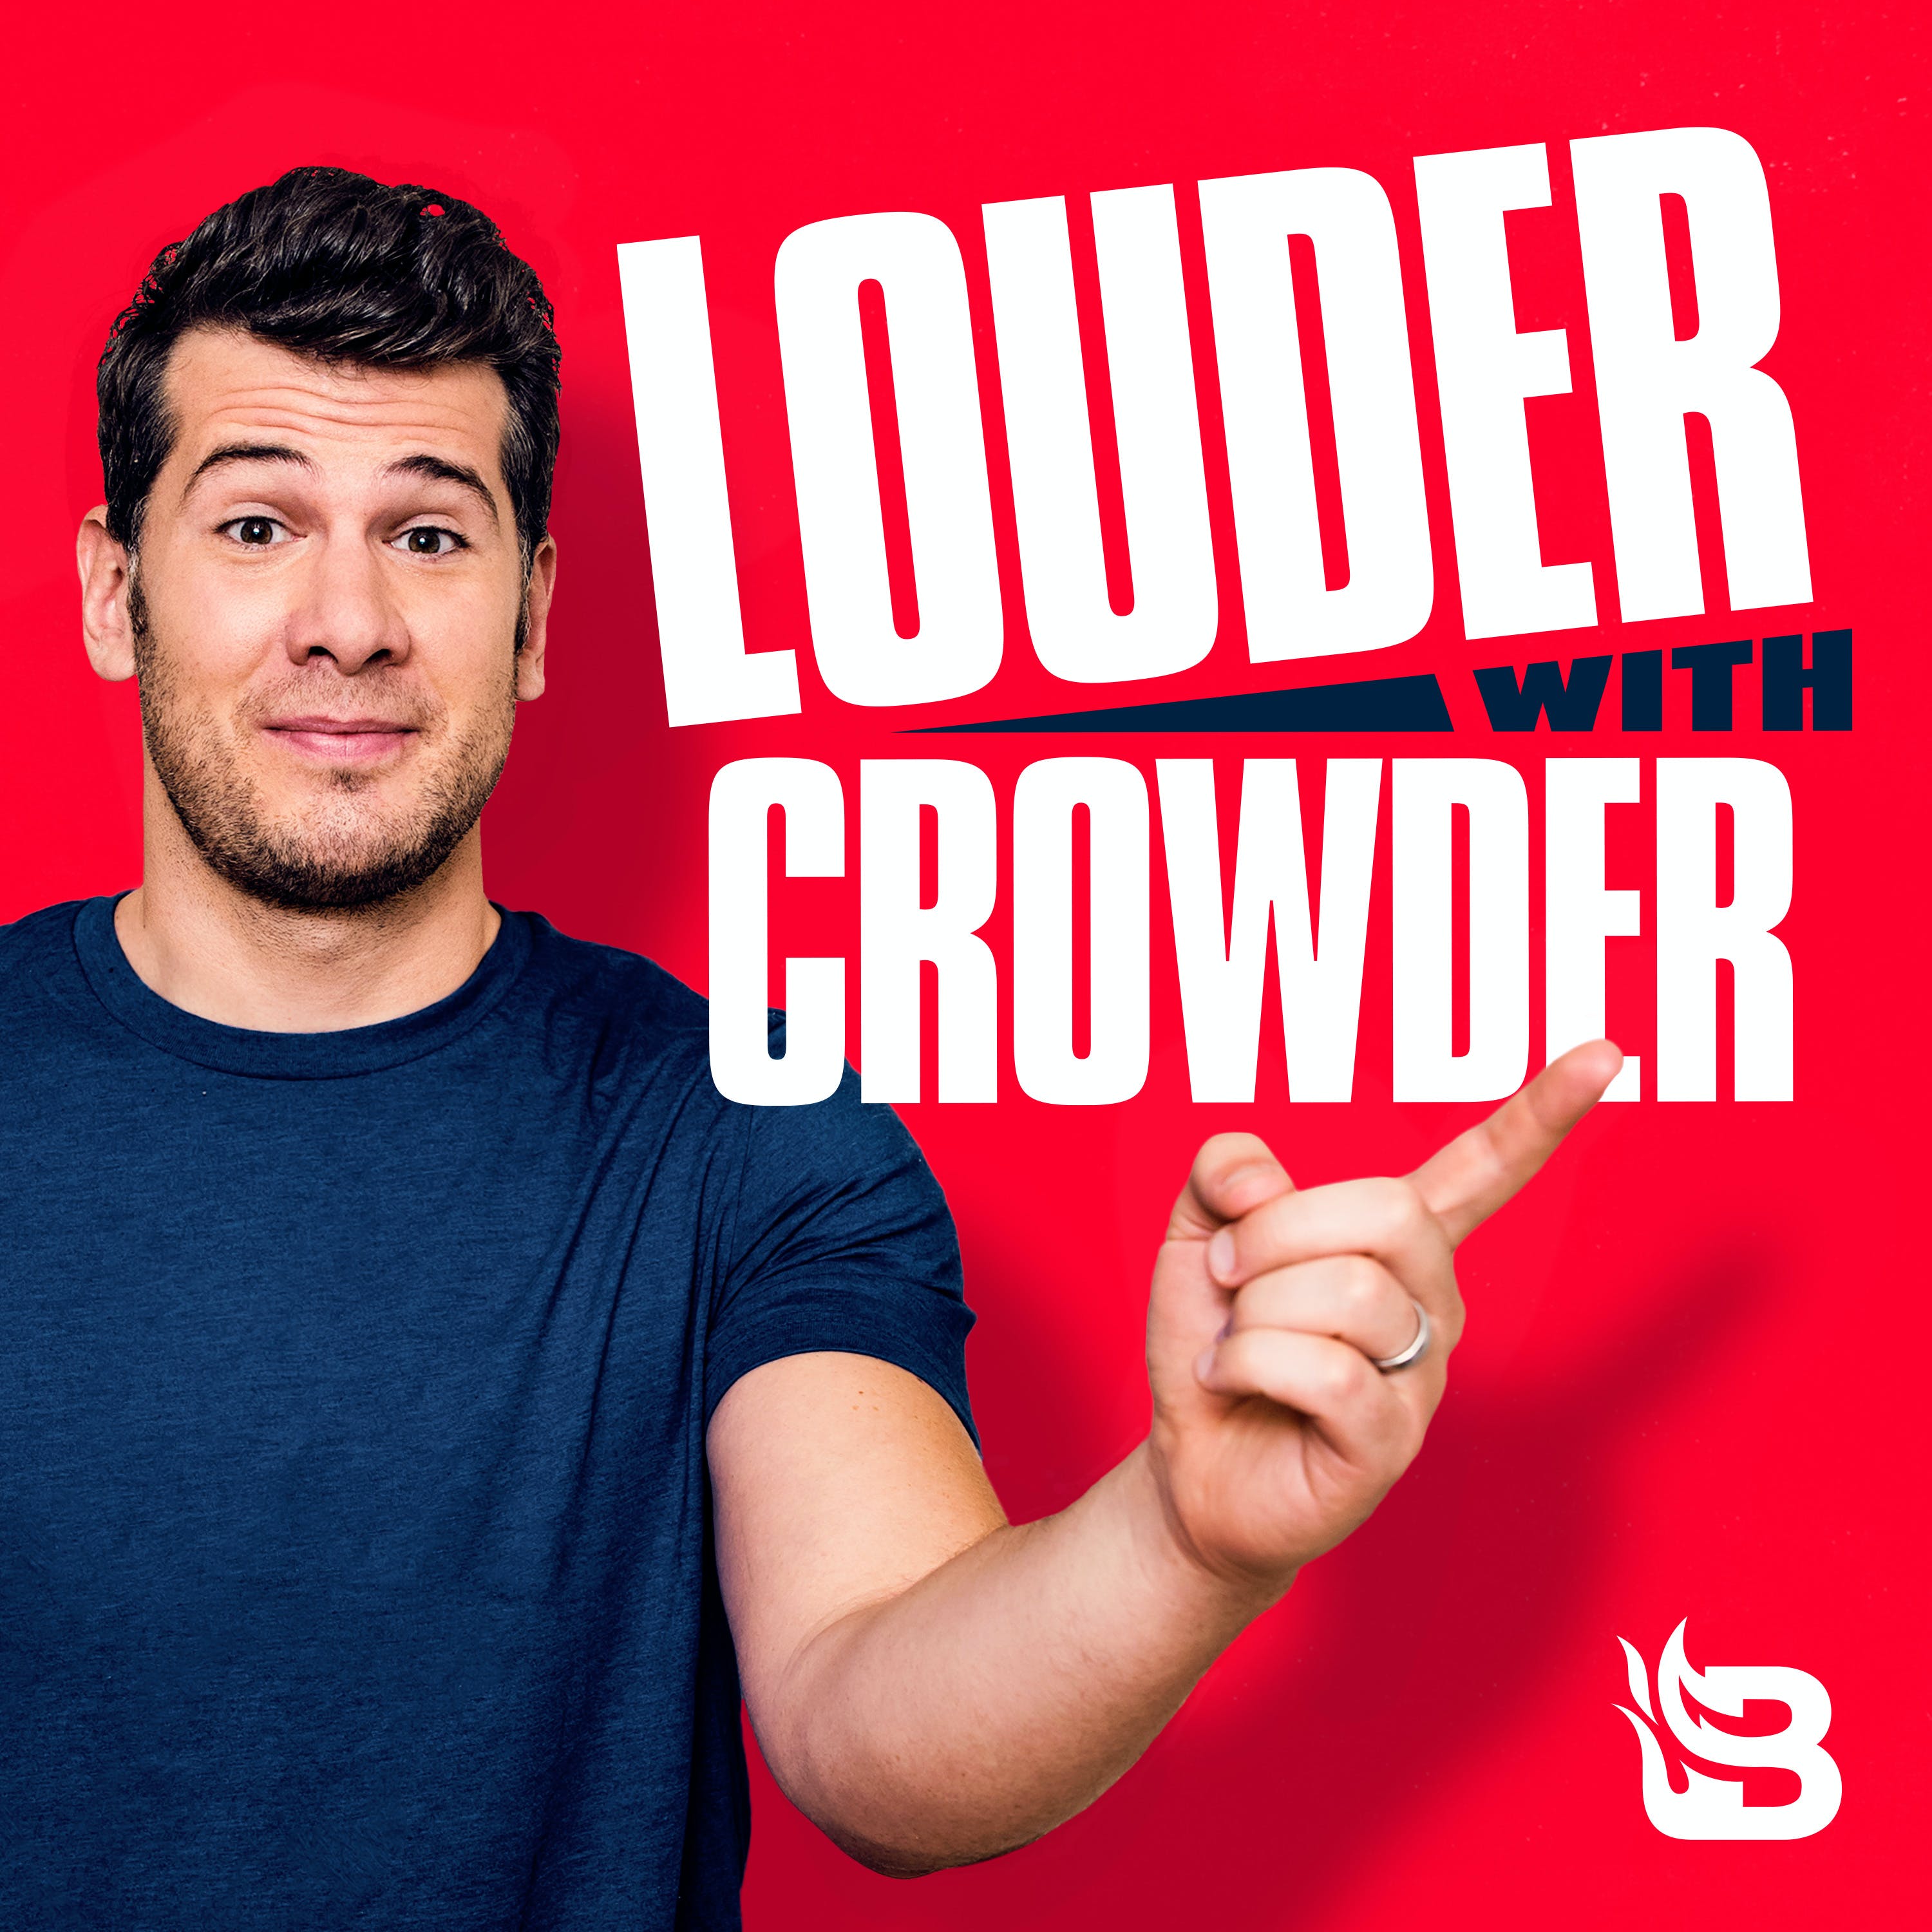 Steven Crowder Accidentally Followed the Carnivore Diet After a Surgery